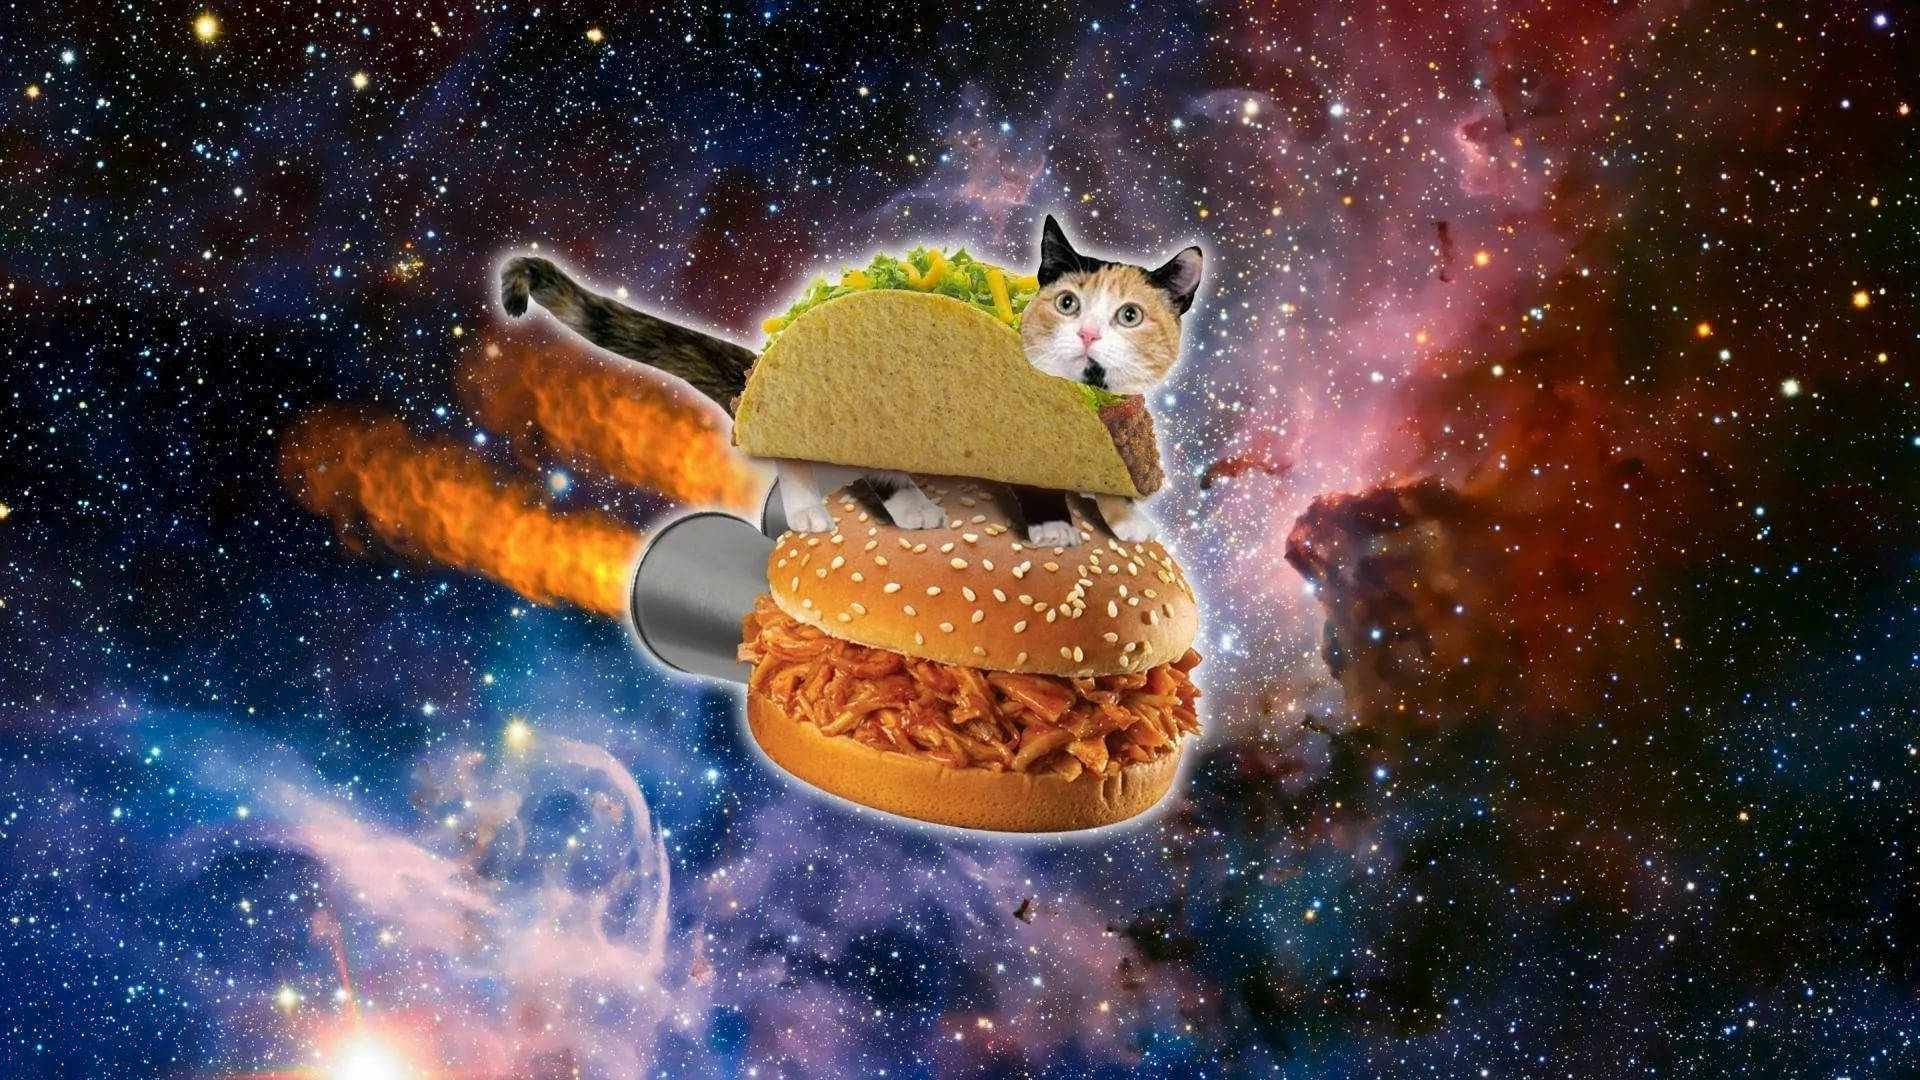 Taco cat riding a burger spaceship on outer space with his taco body, animal meme.